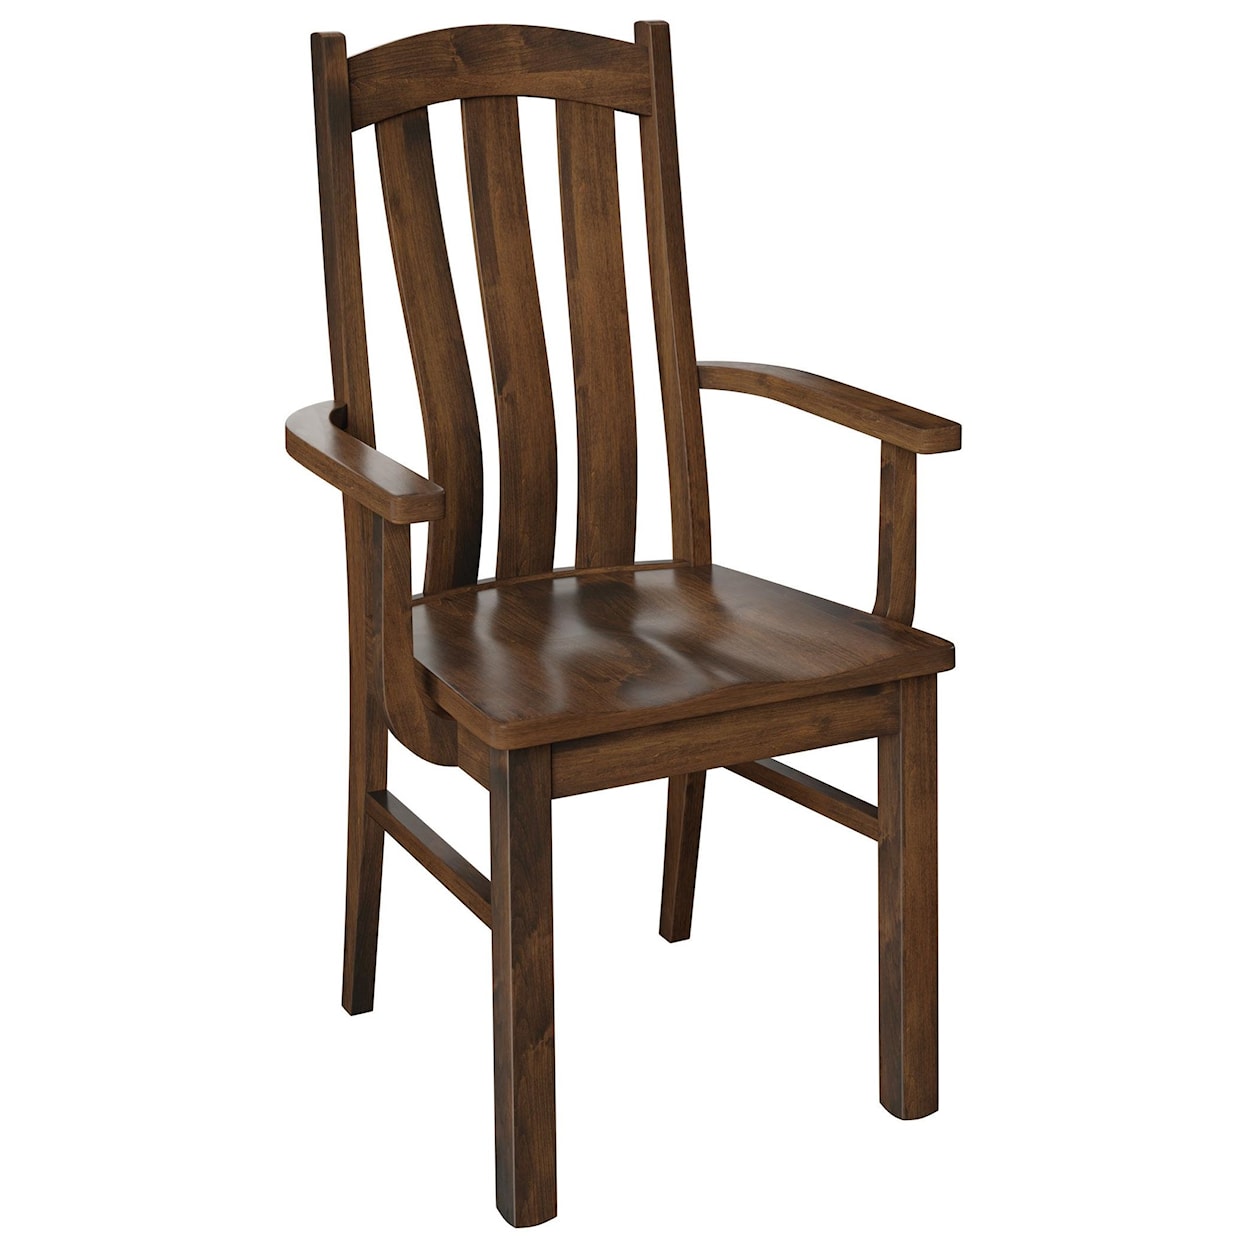 Wengerd Wood Products Reily Arm Chair